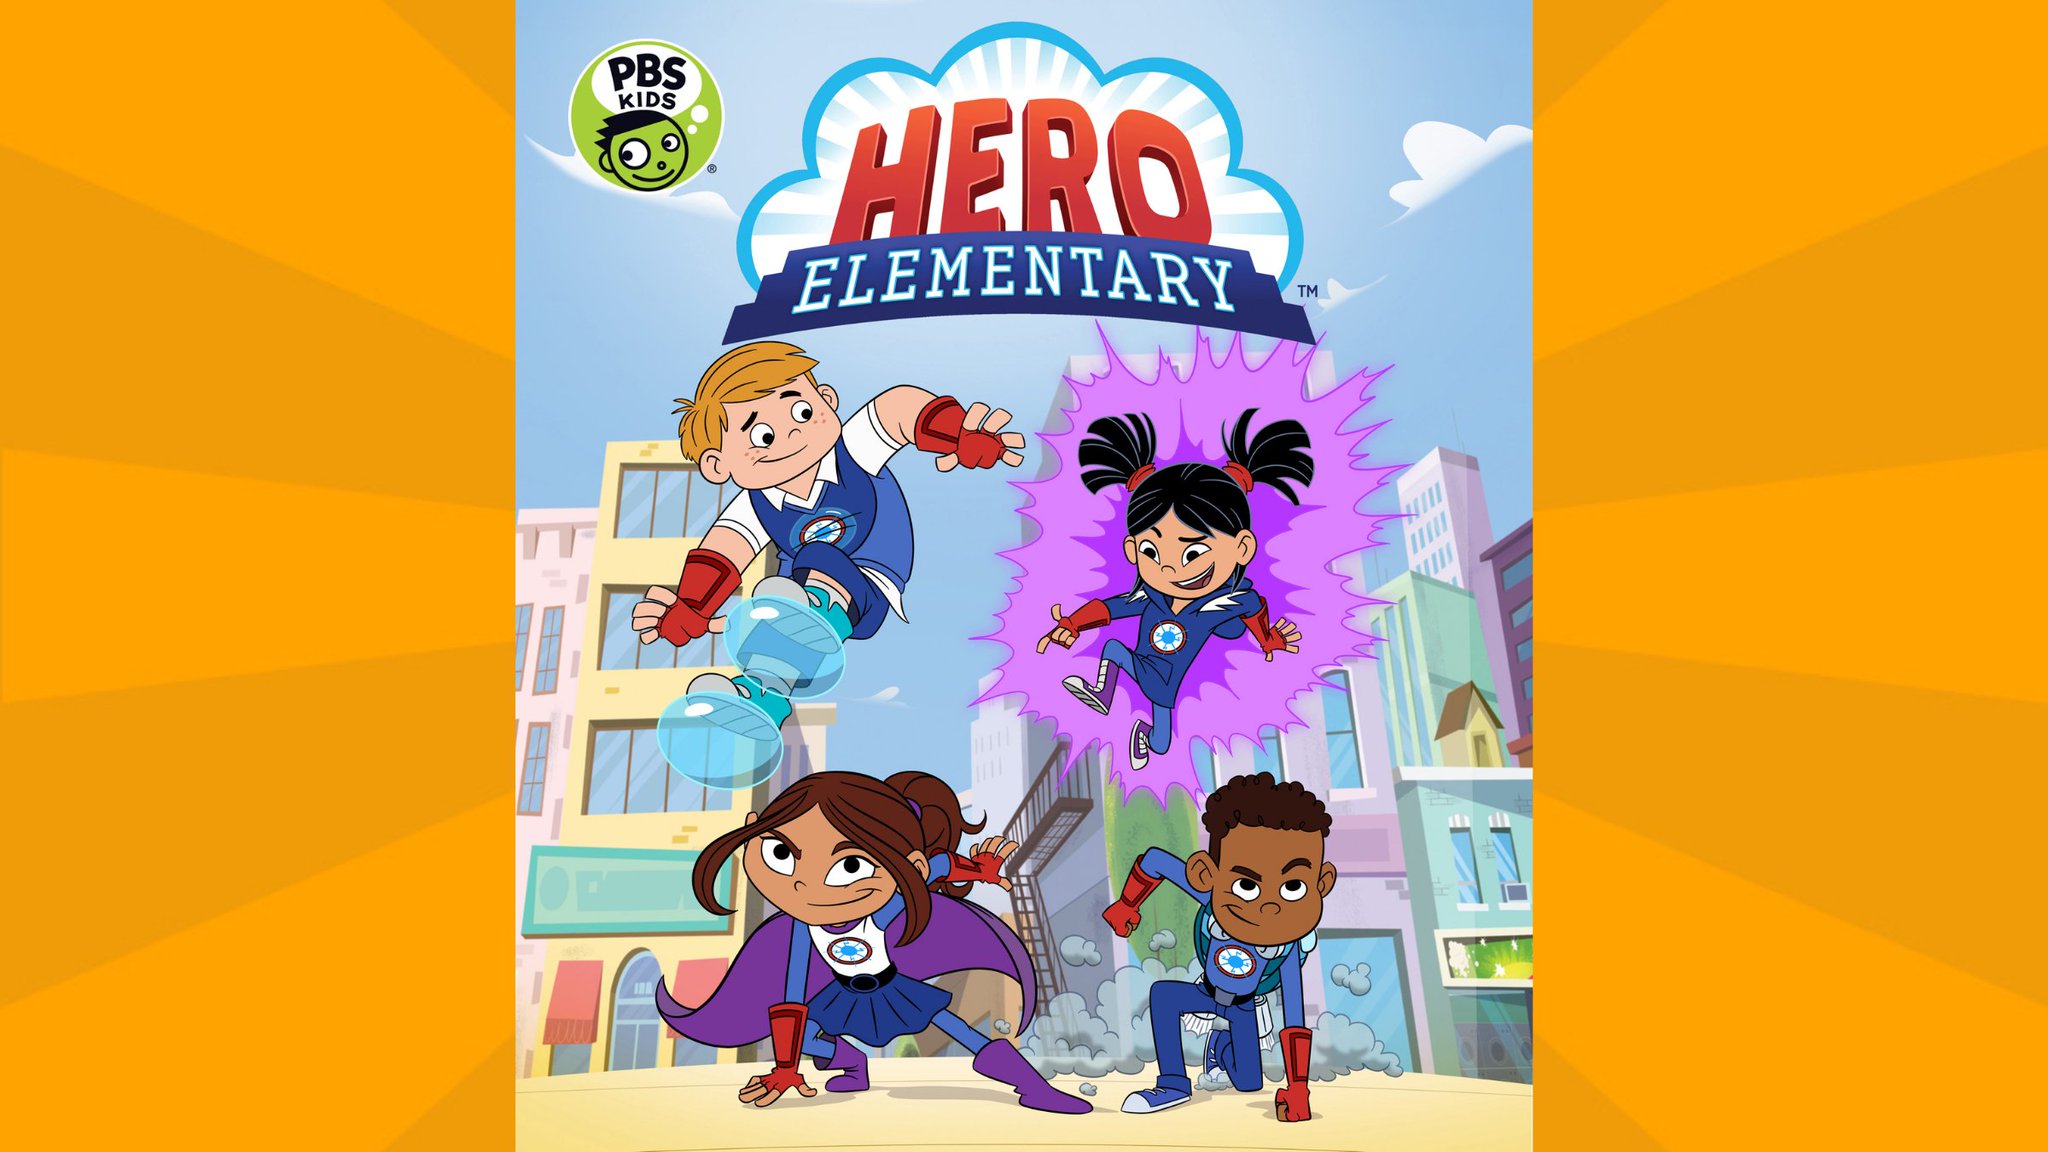 Hero Elementary EPISODES! ❗For All Our Science Loving Kiddos, We've Got Brand New Episodes Of Encourage Your Children's Love Of Science And Watch Check Local Listings For